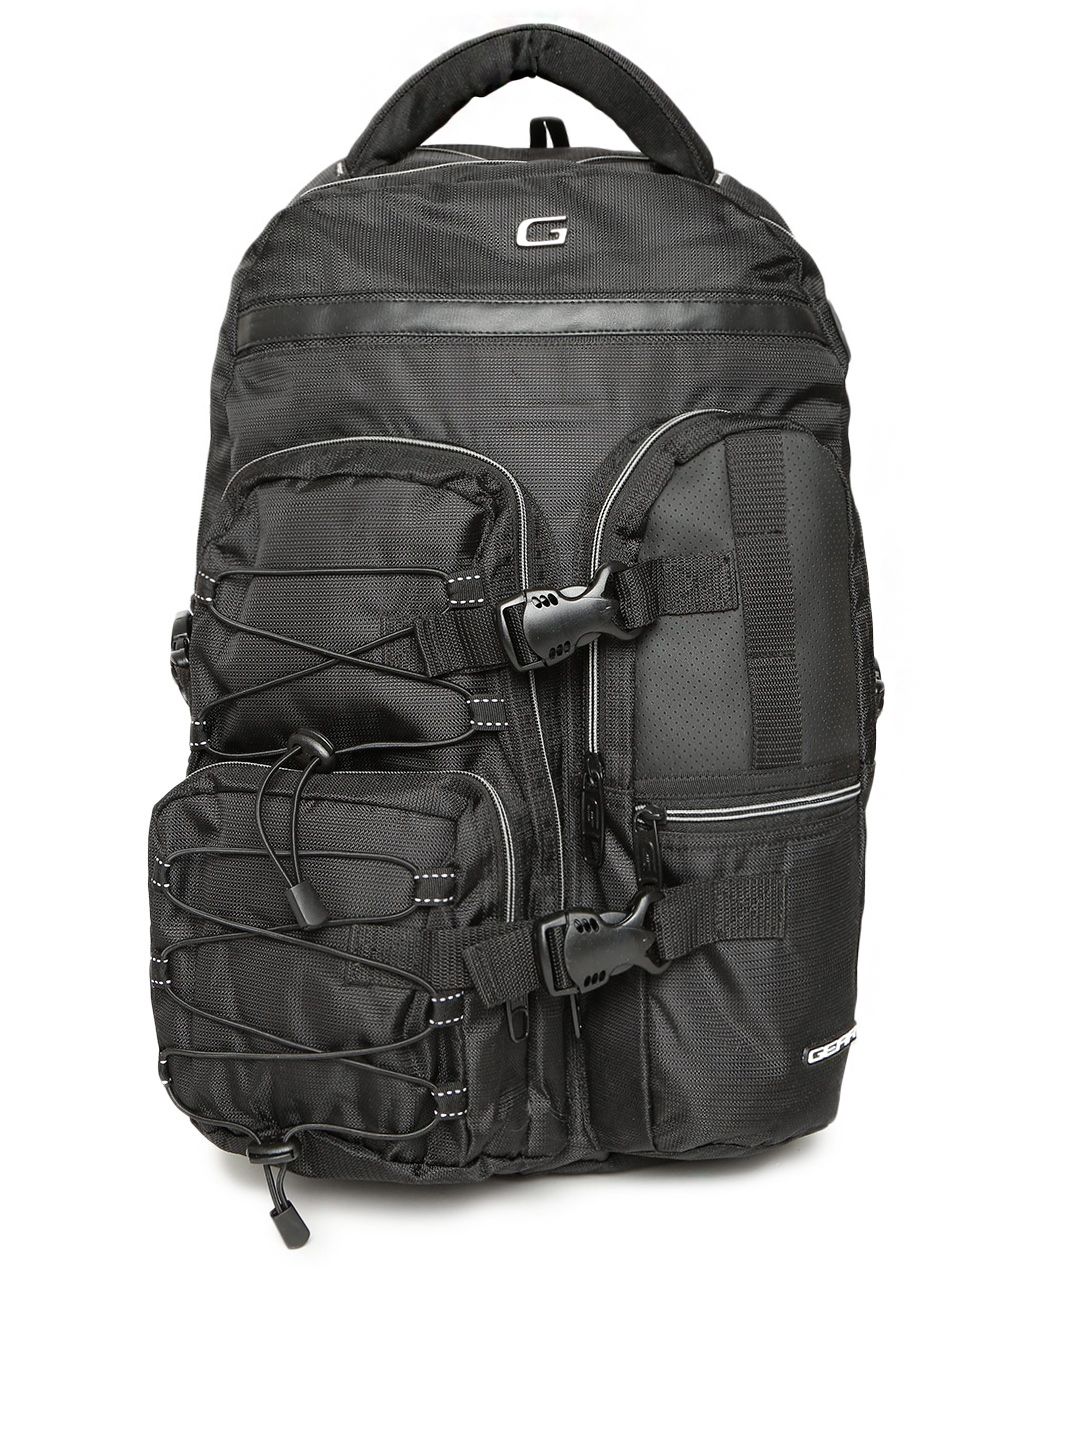 Gear Unisex Black Textured Laptop Backpack Price in India